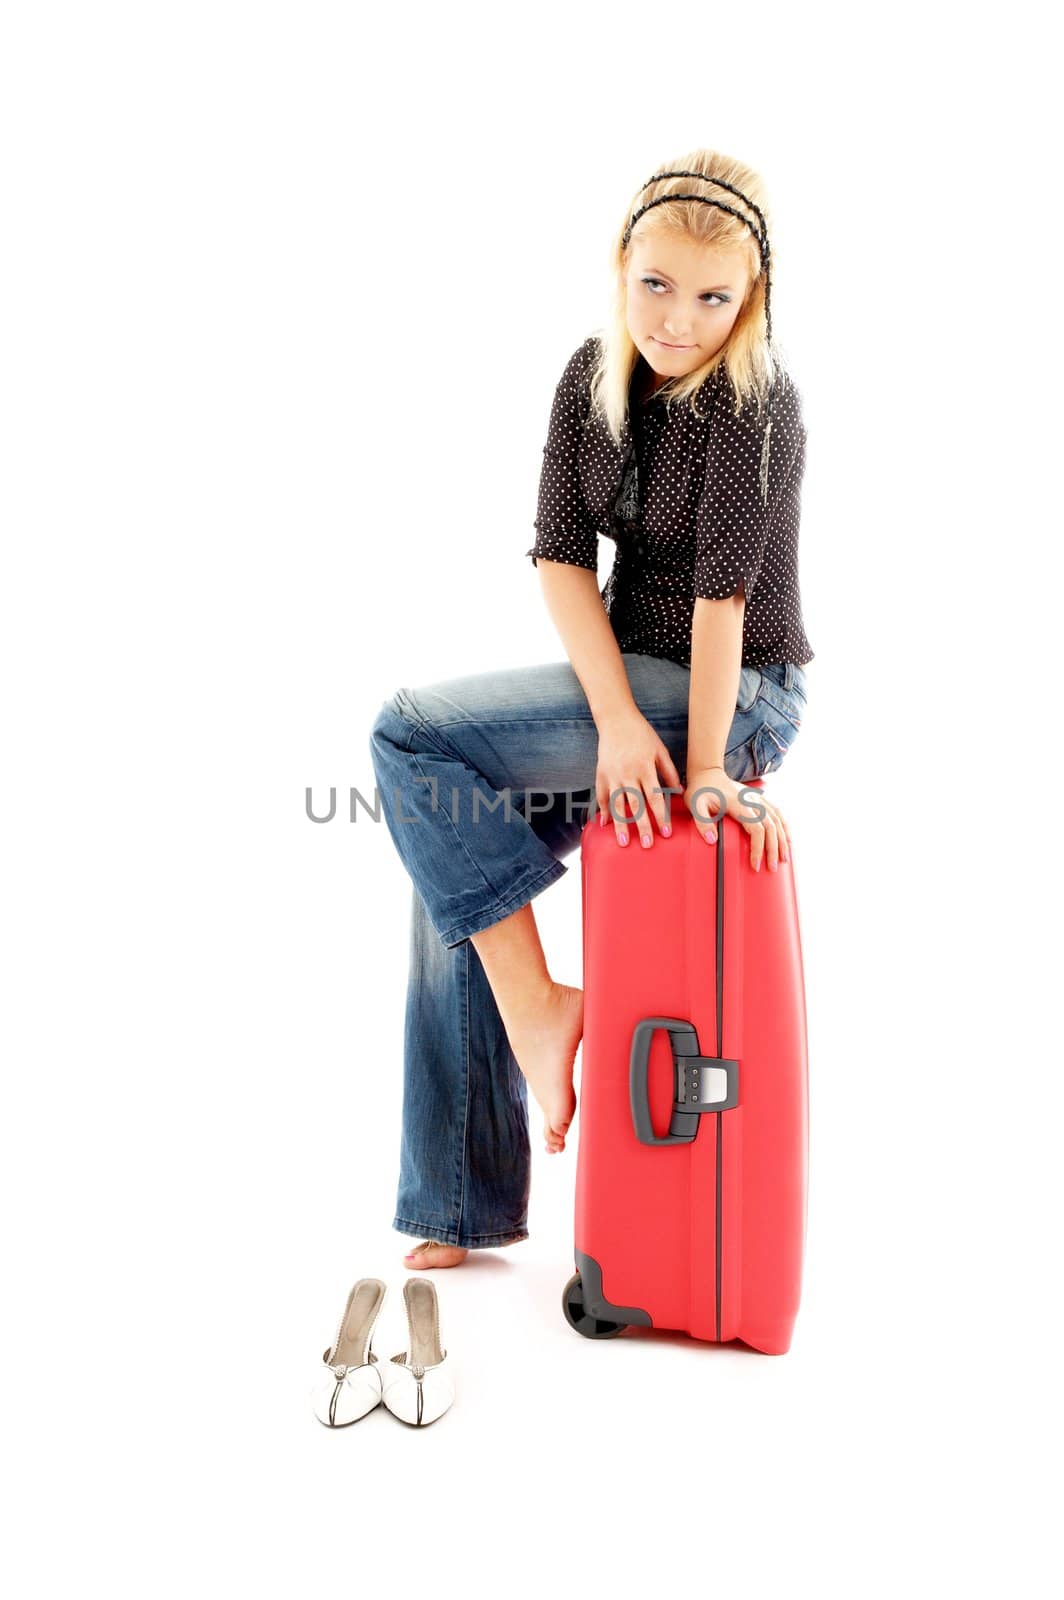 blond girl sitting on red trunk over white